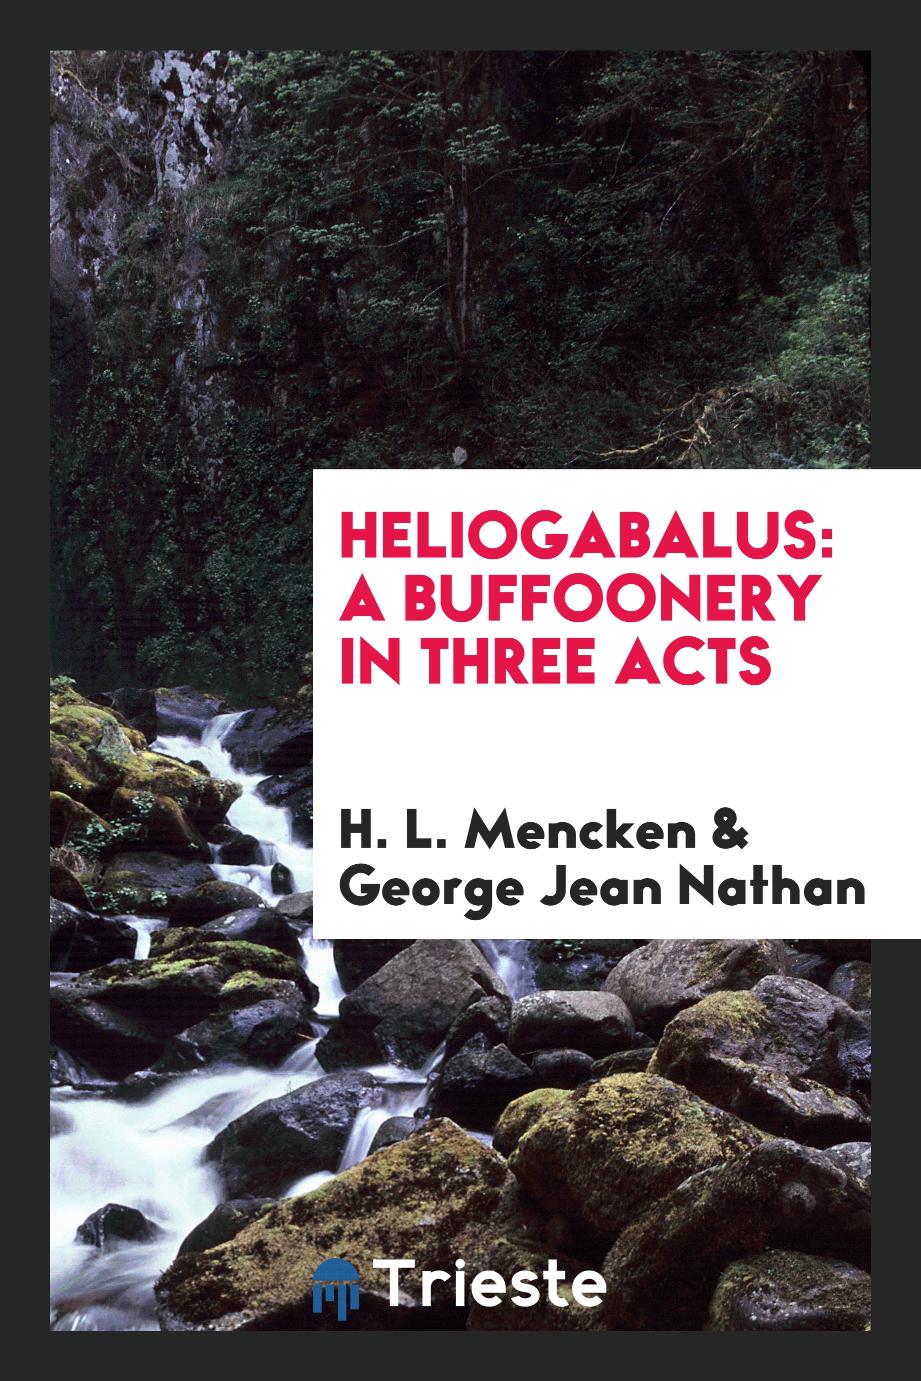 Heliogabalus: a buffoonery in three acts